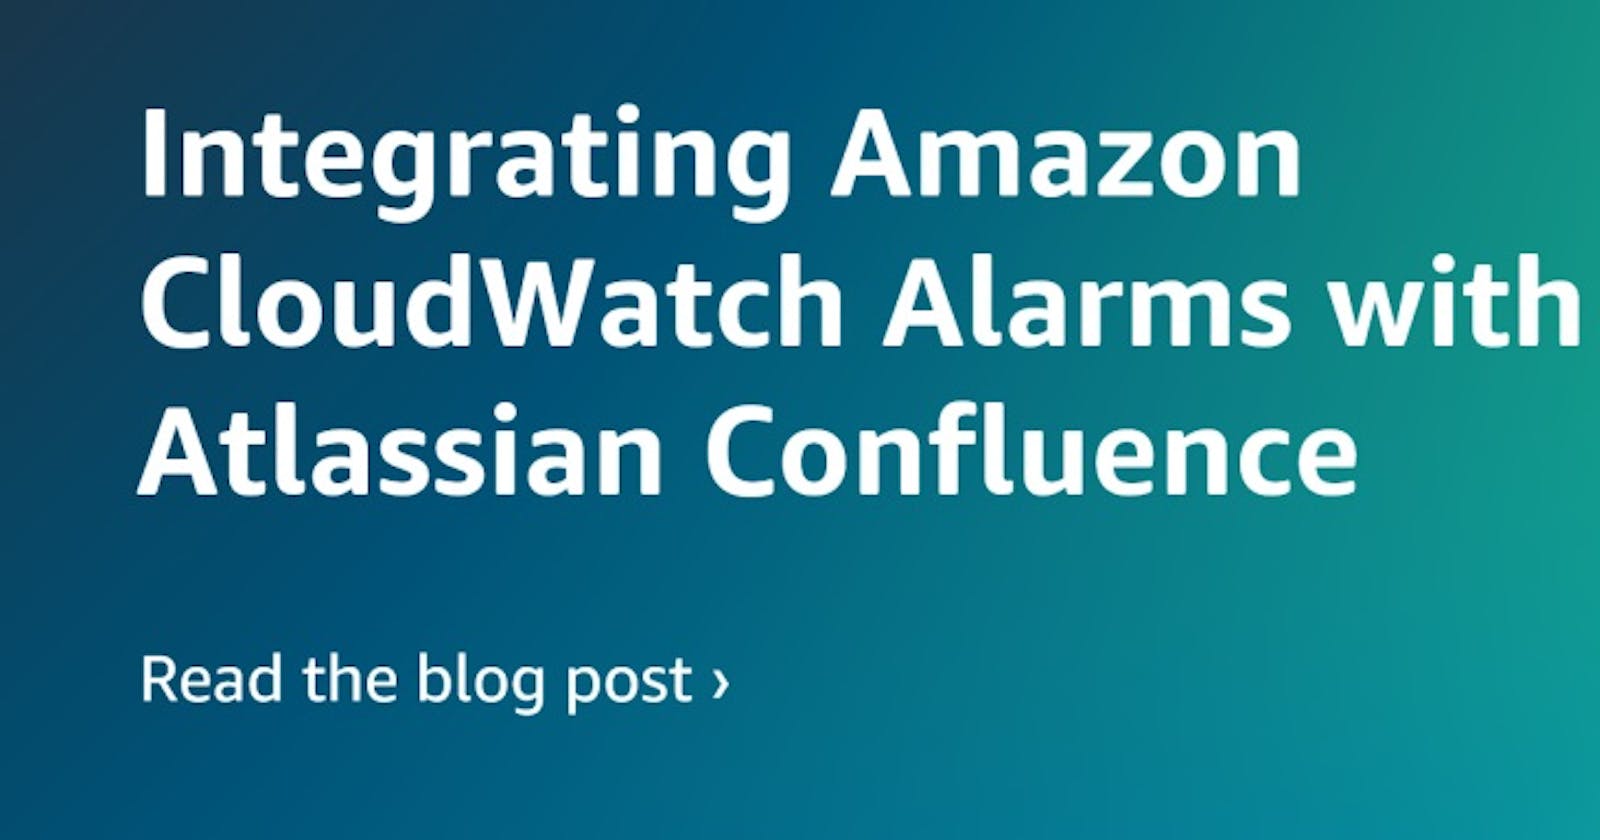 How to Integrate Amazon CloudWatch Alarms with Atlassian Confluence?